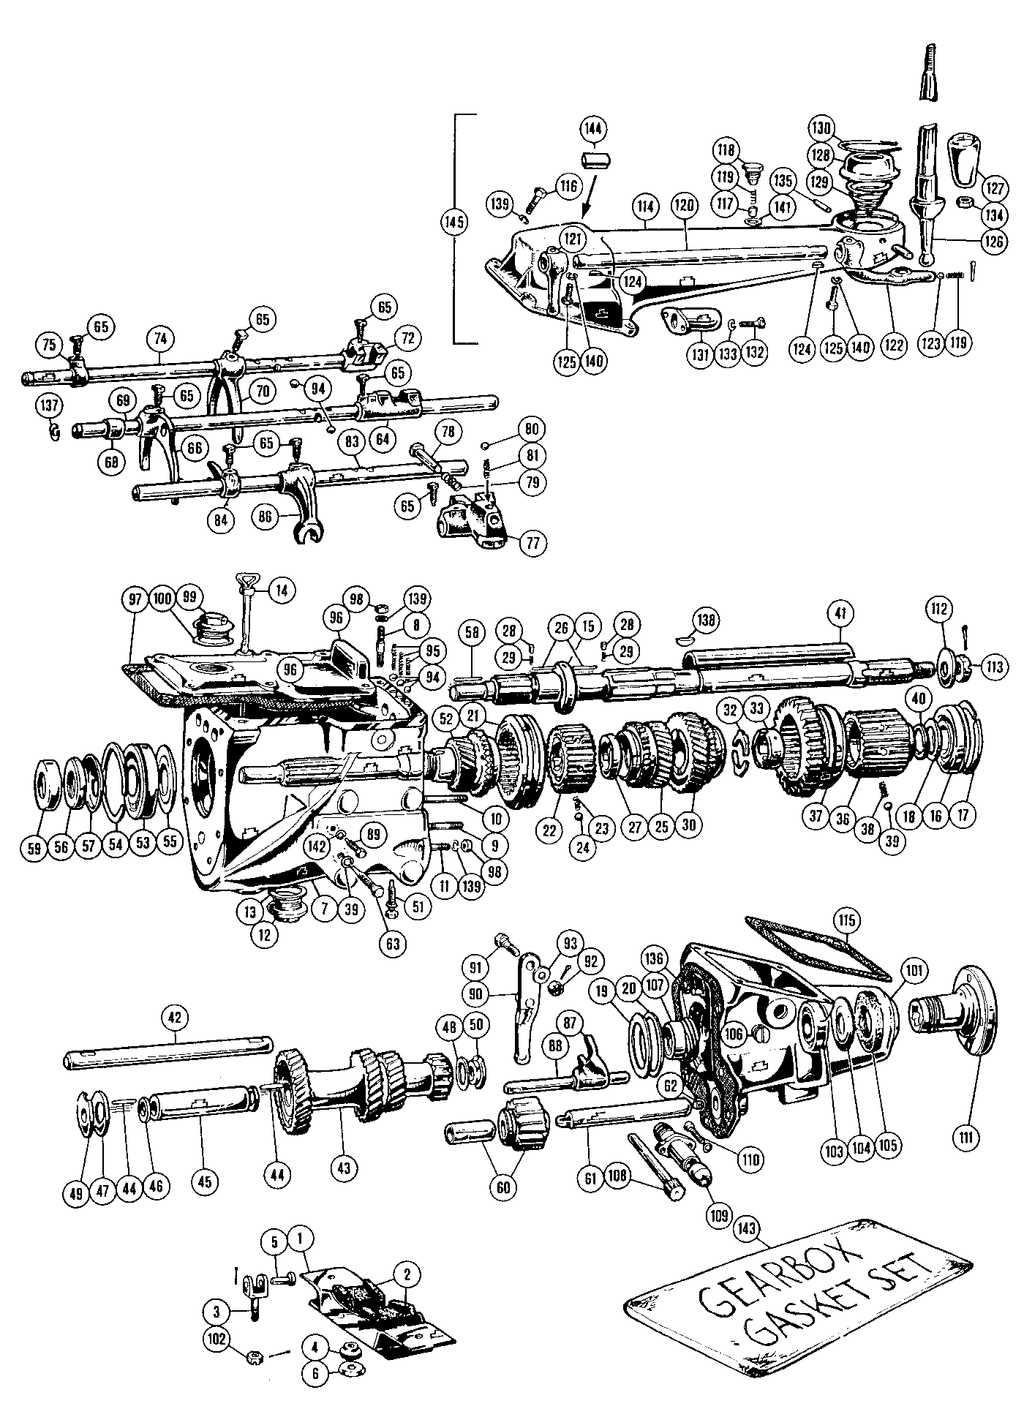 MGTD-TF 1949-1955 - Versnellingspoken | Webshop Anglo Parts - 1